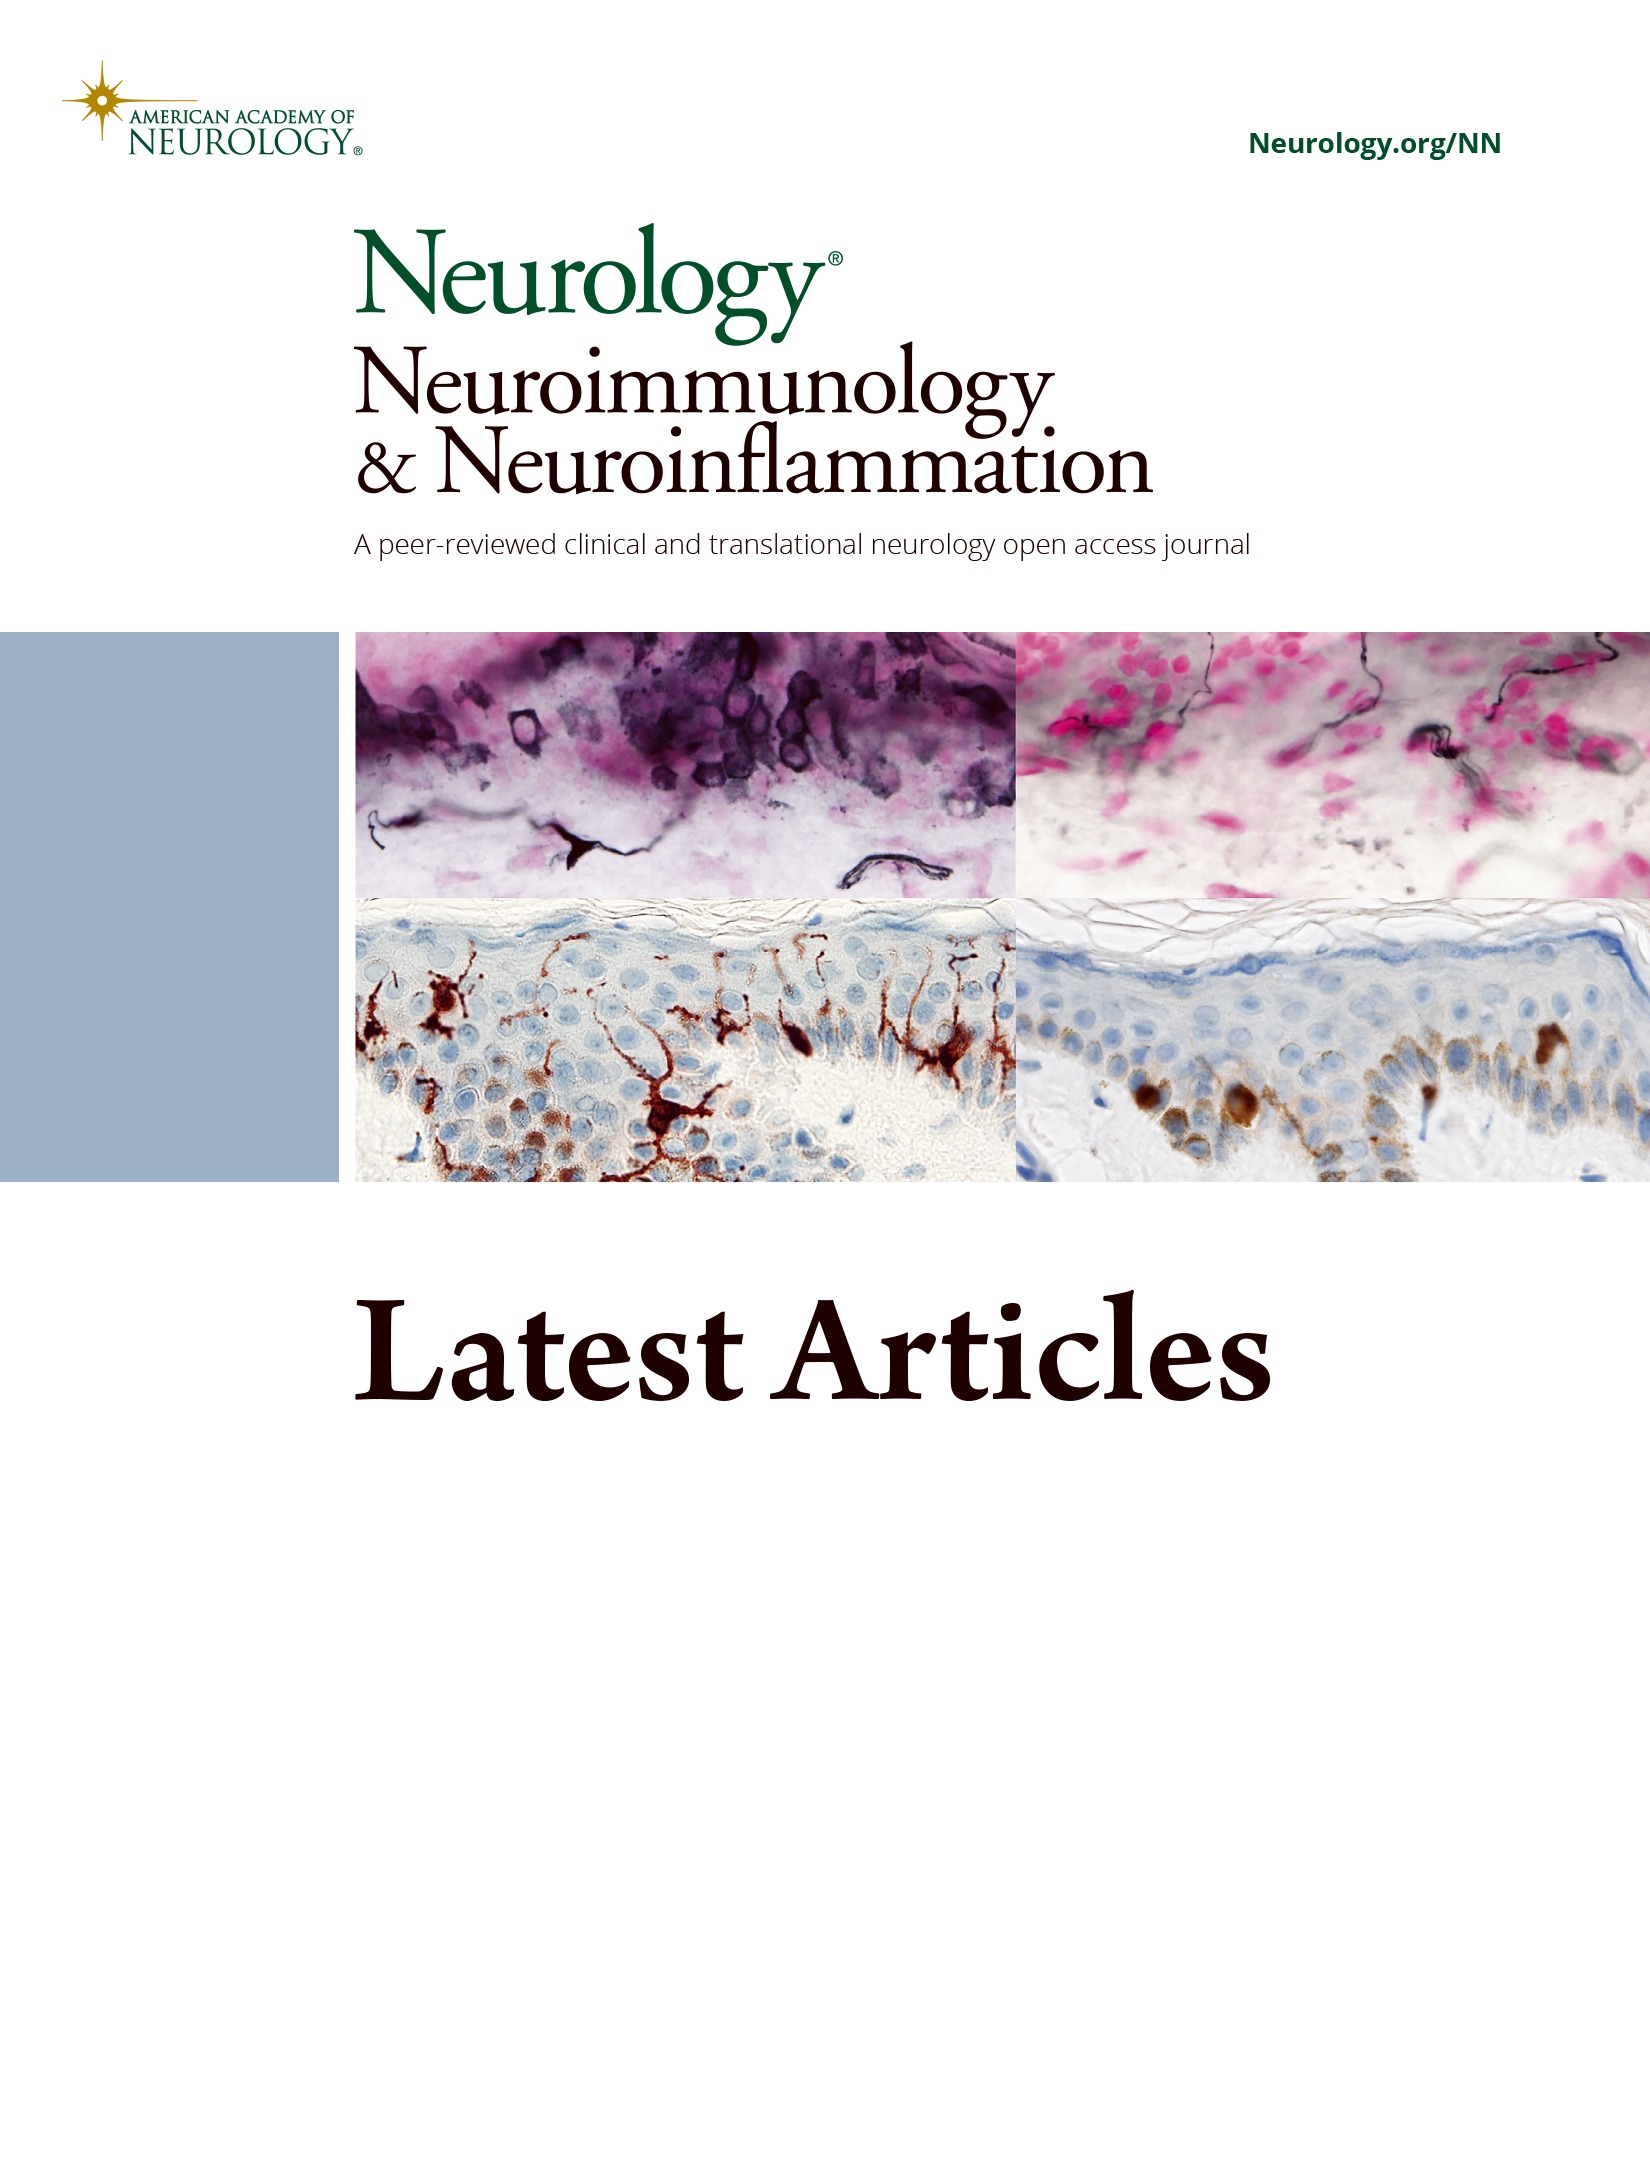 Intrathecal CD8+CD20+ T Cells in Primary Progressive Multiple Sclerosis